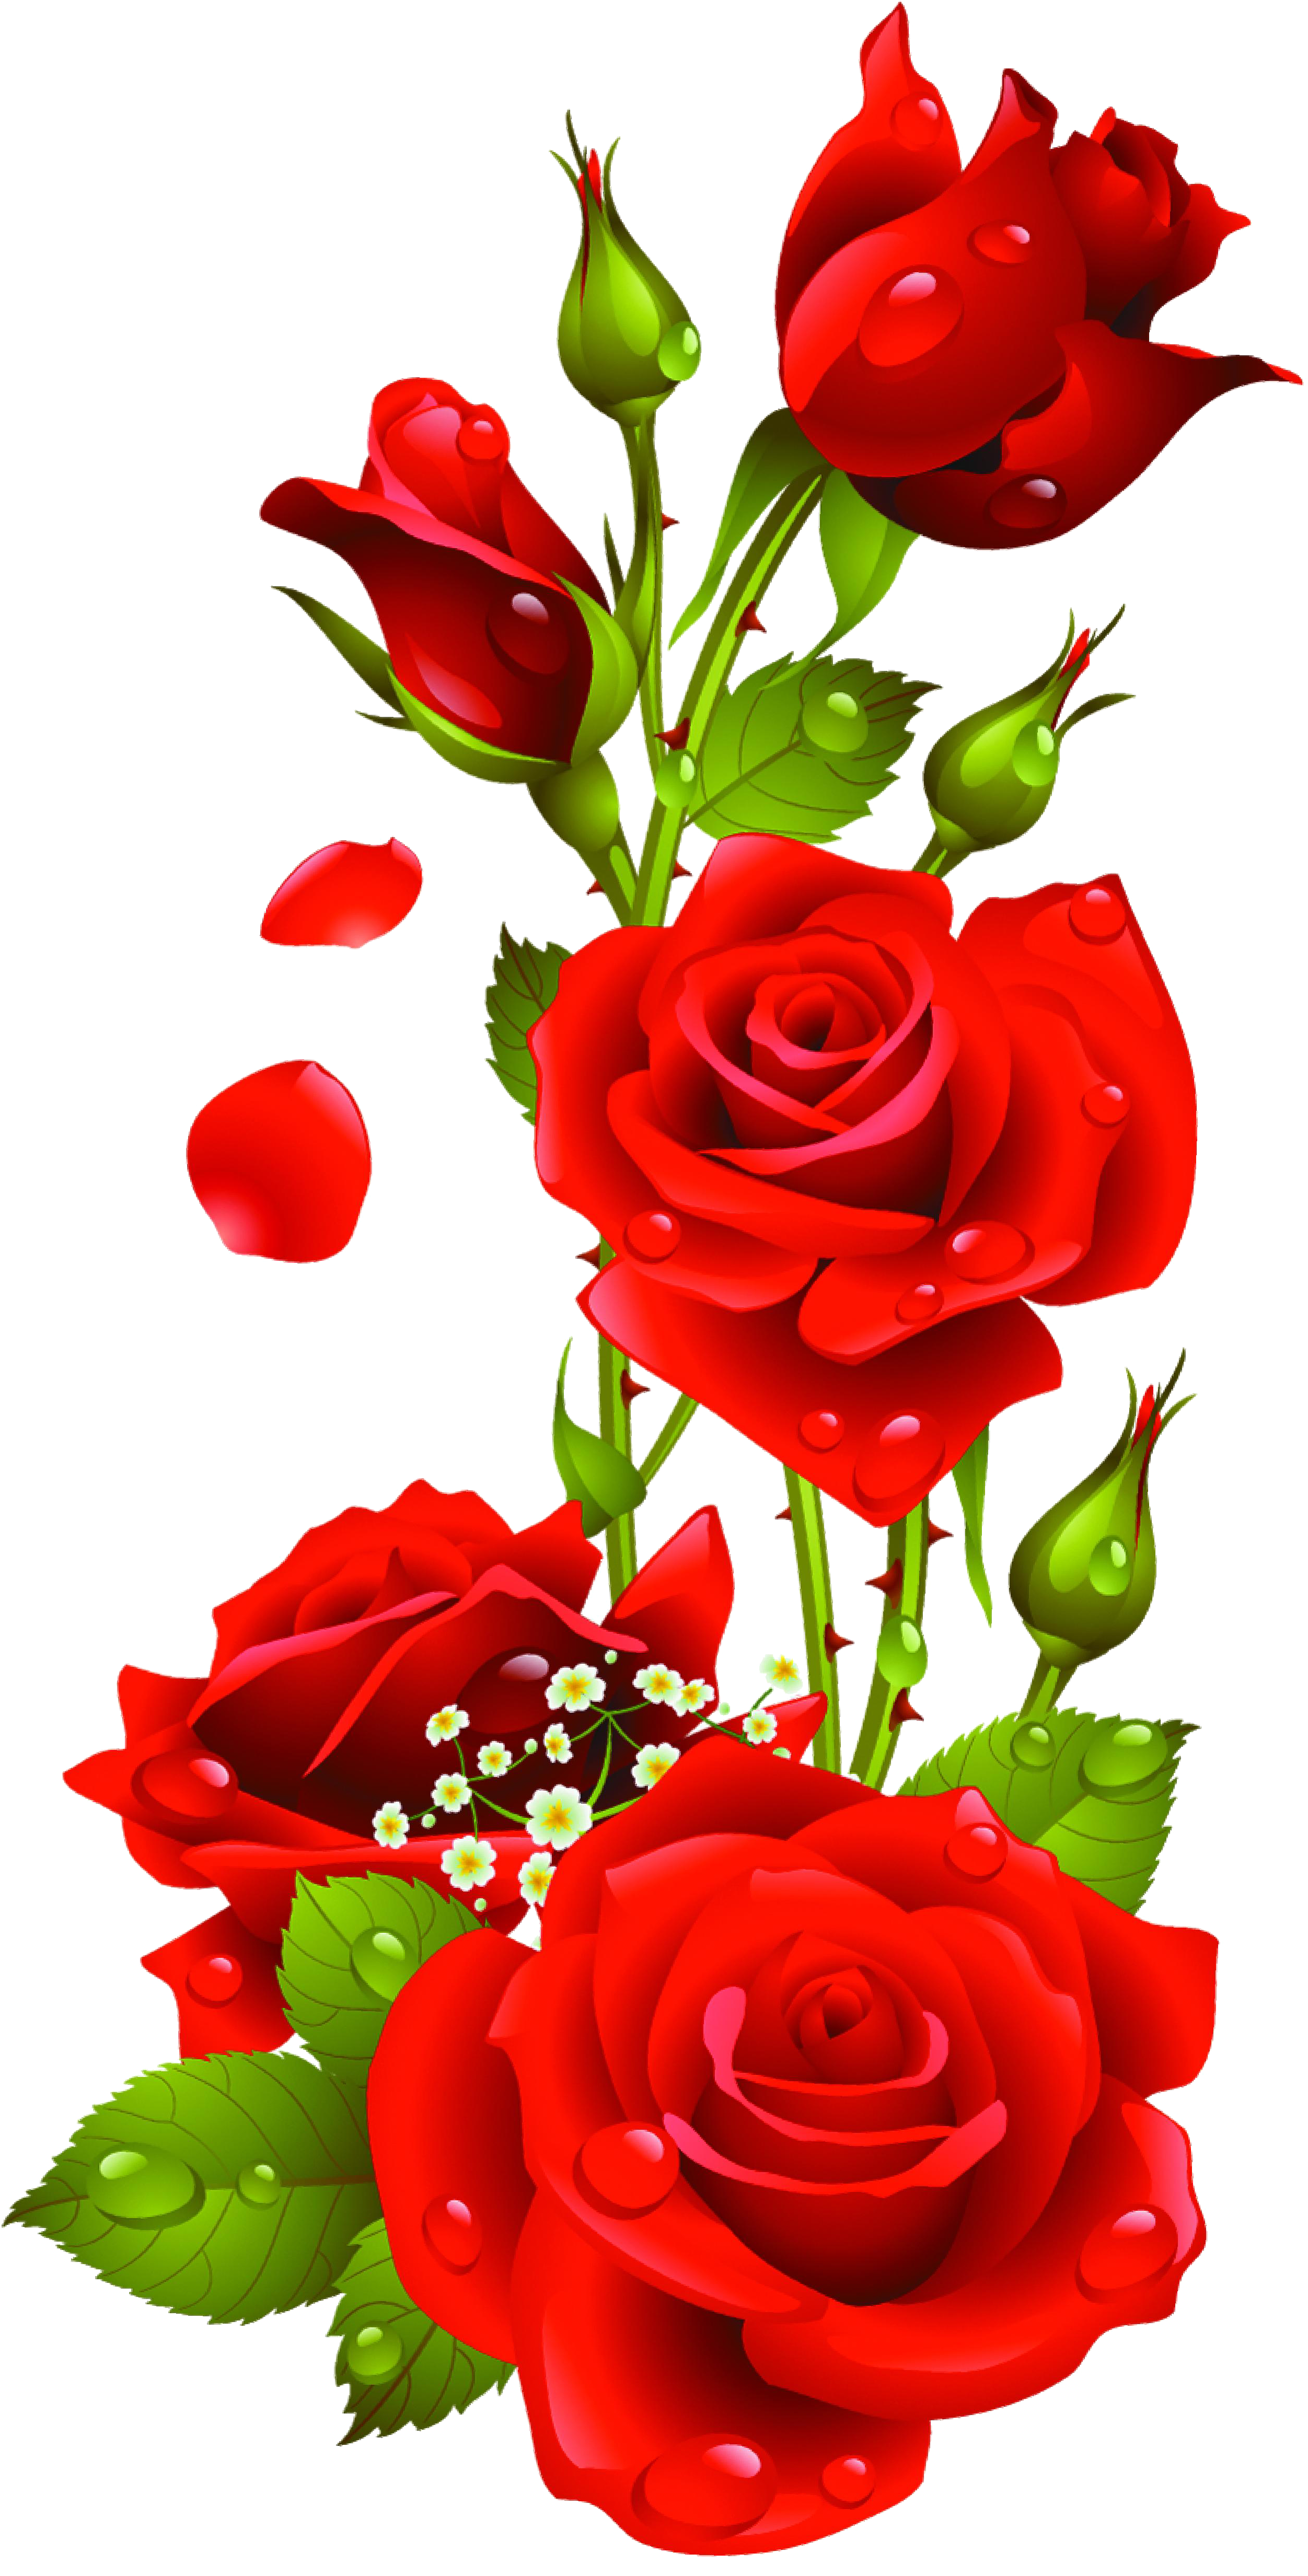 Hd Rose Image In Our System PNG Transparent Background, Free Download #18992